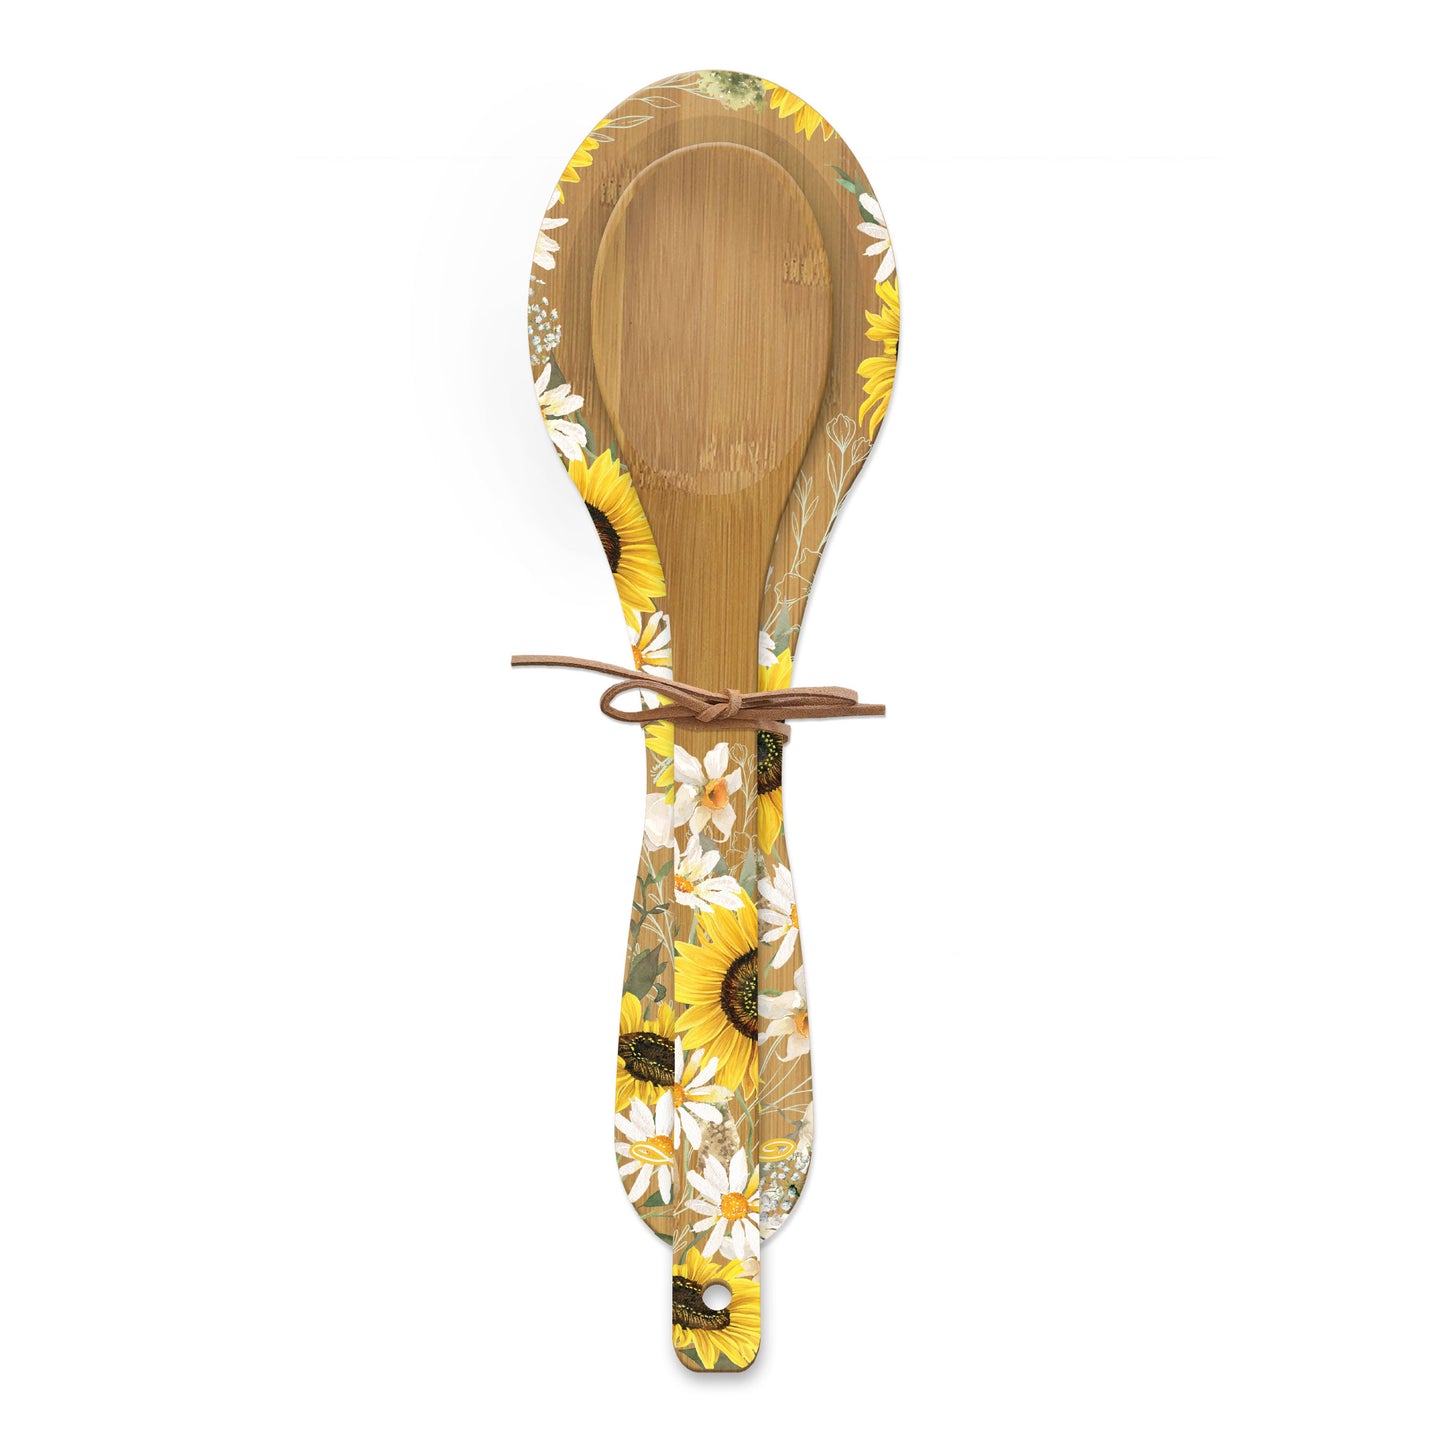 Bamboo Spoon rest & spoon. Includes gift tag. Daisy Chains.